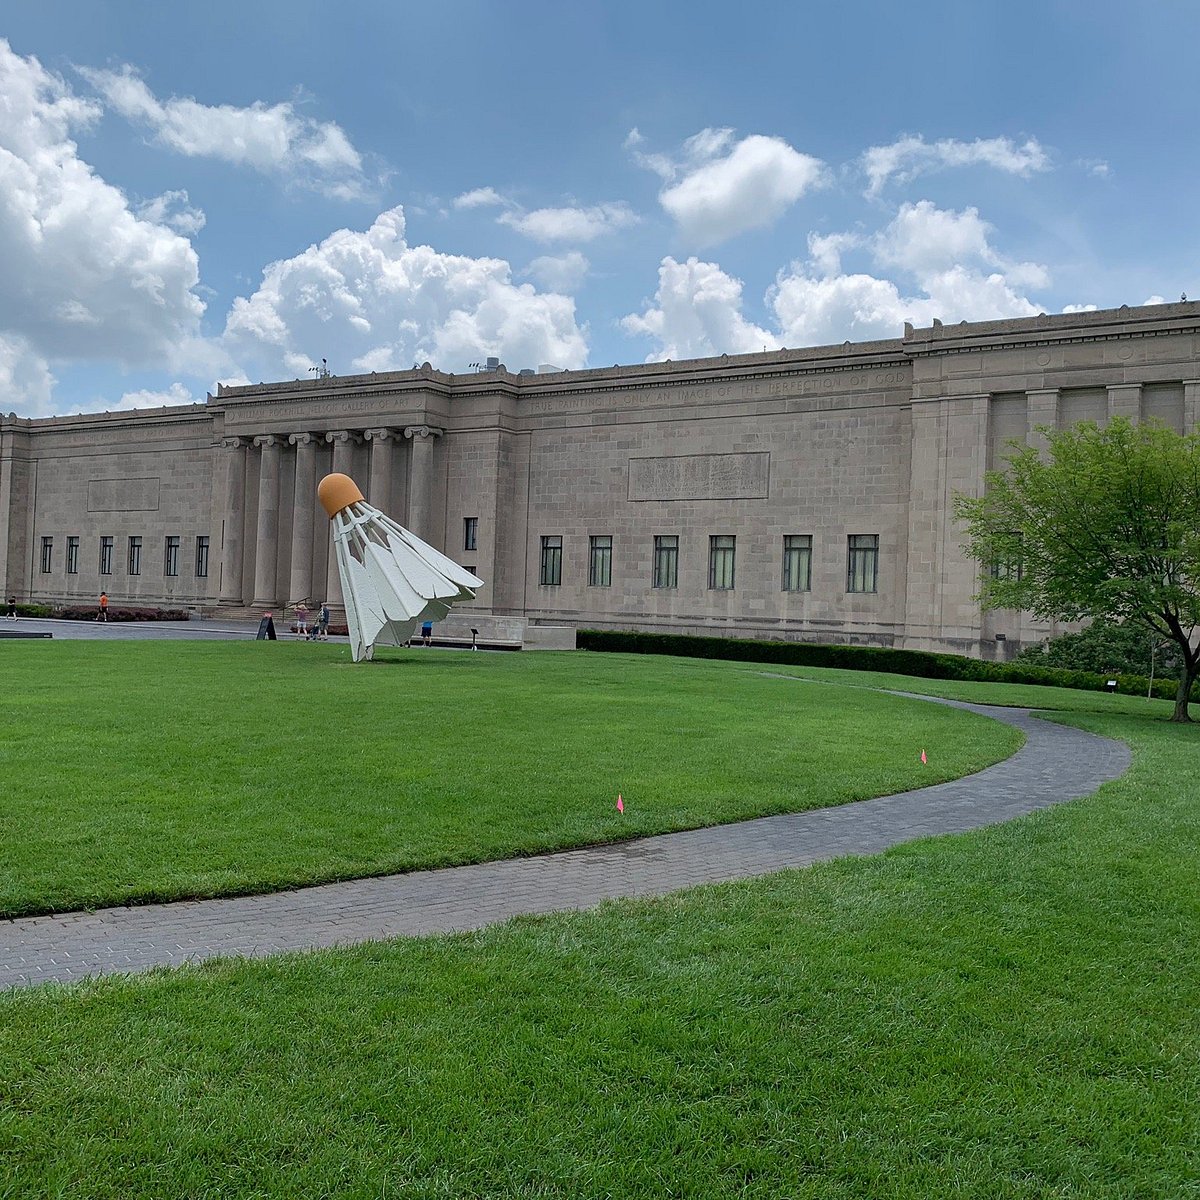 Top 97+ Images the nelson-atkins museum of art exhibitions Full HD, 2k, 4k